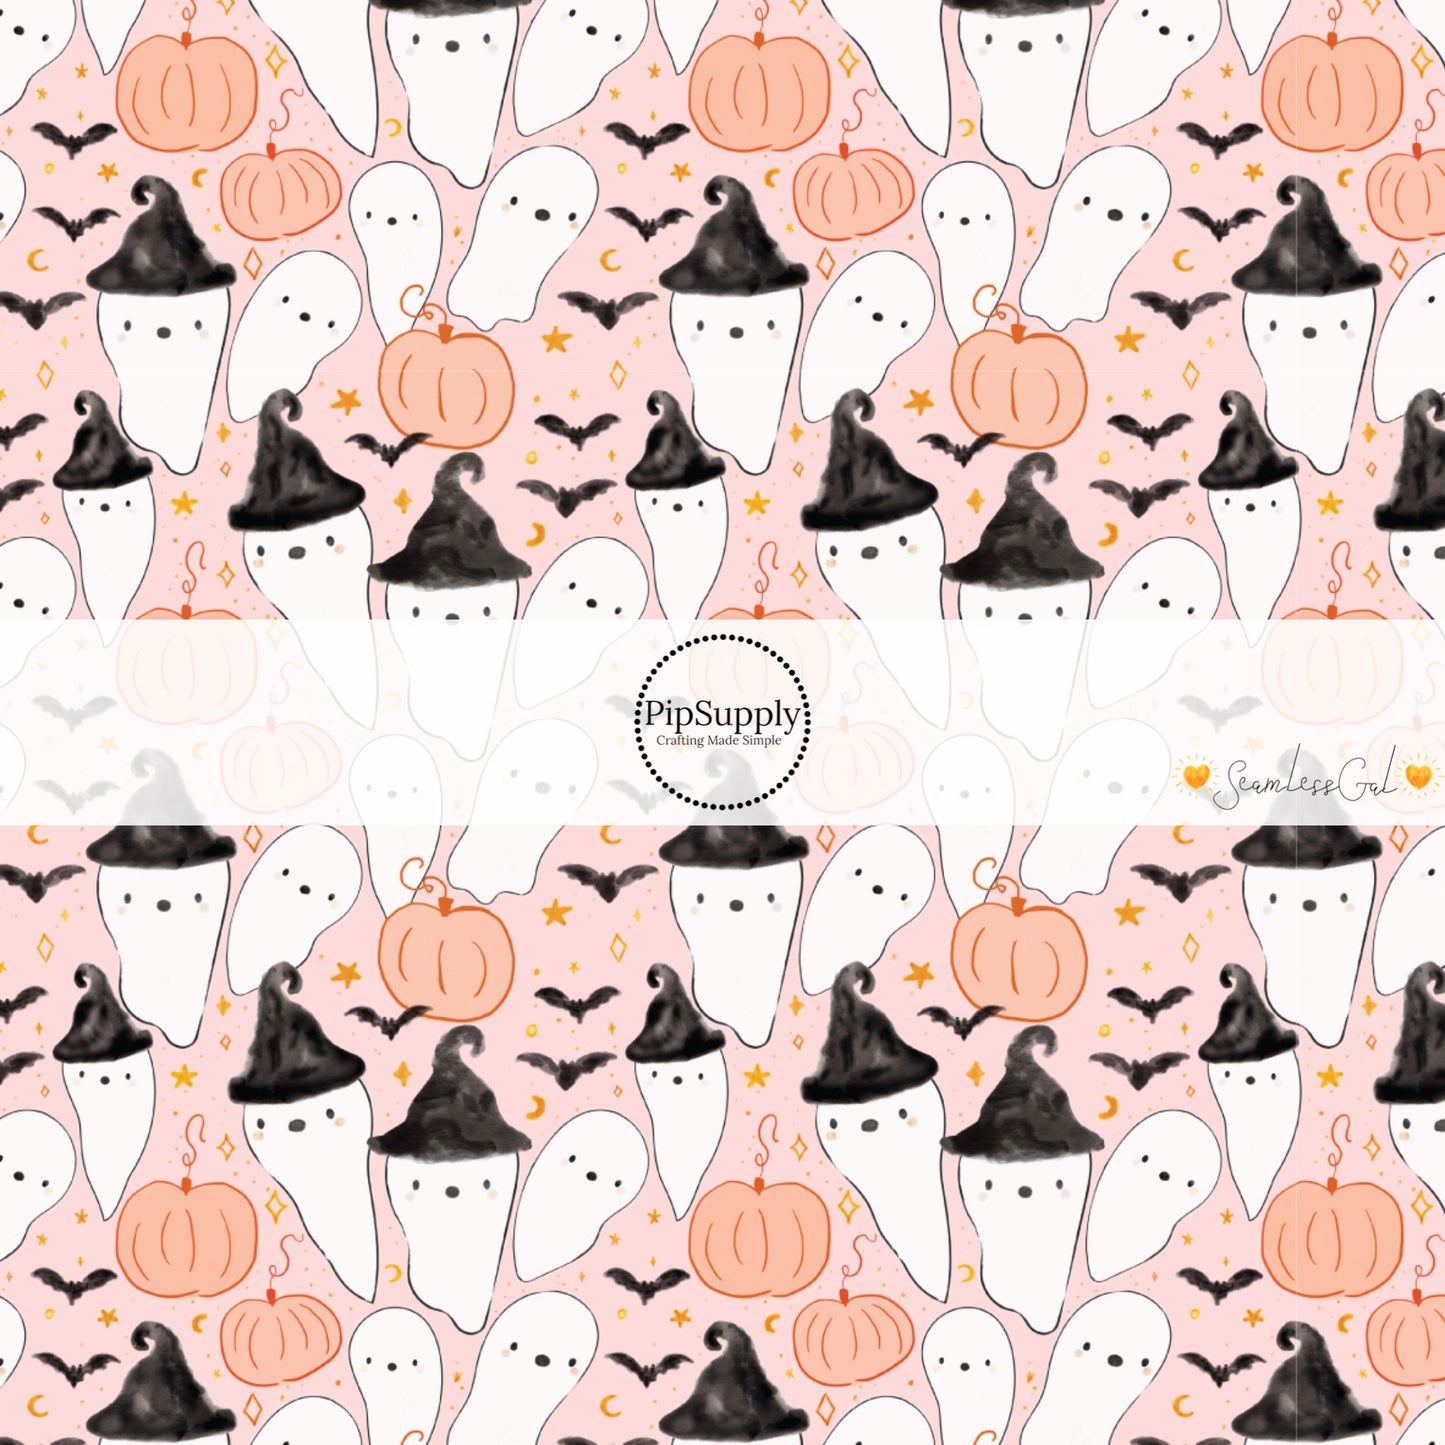 Light Pink fabric by the yard with ghosts, pumpkins, bats, and stars.